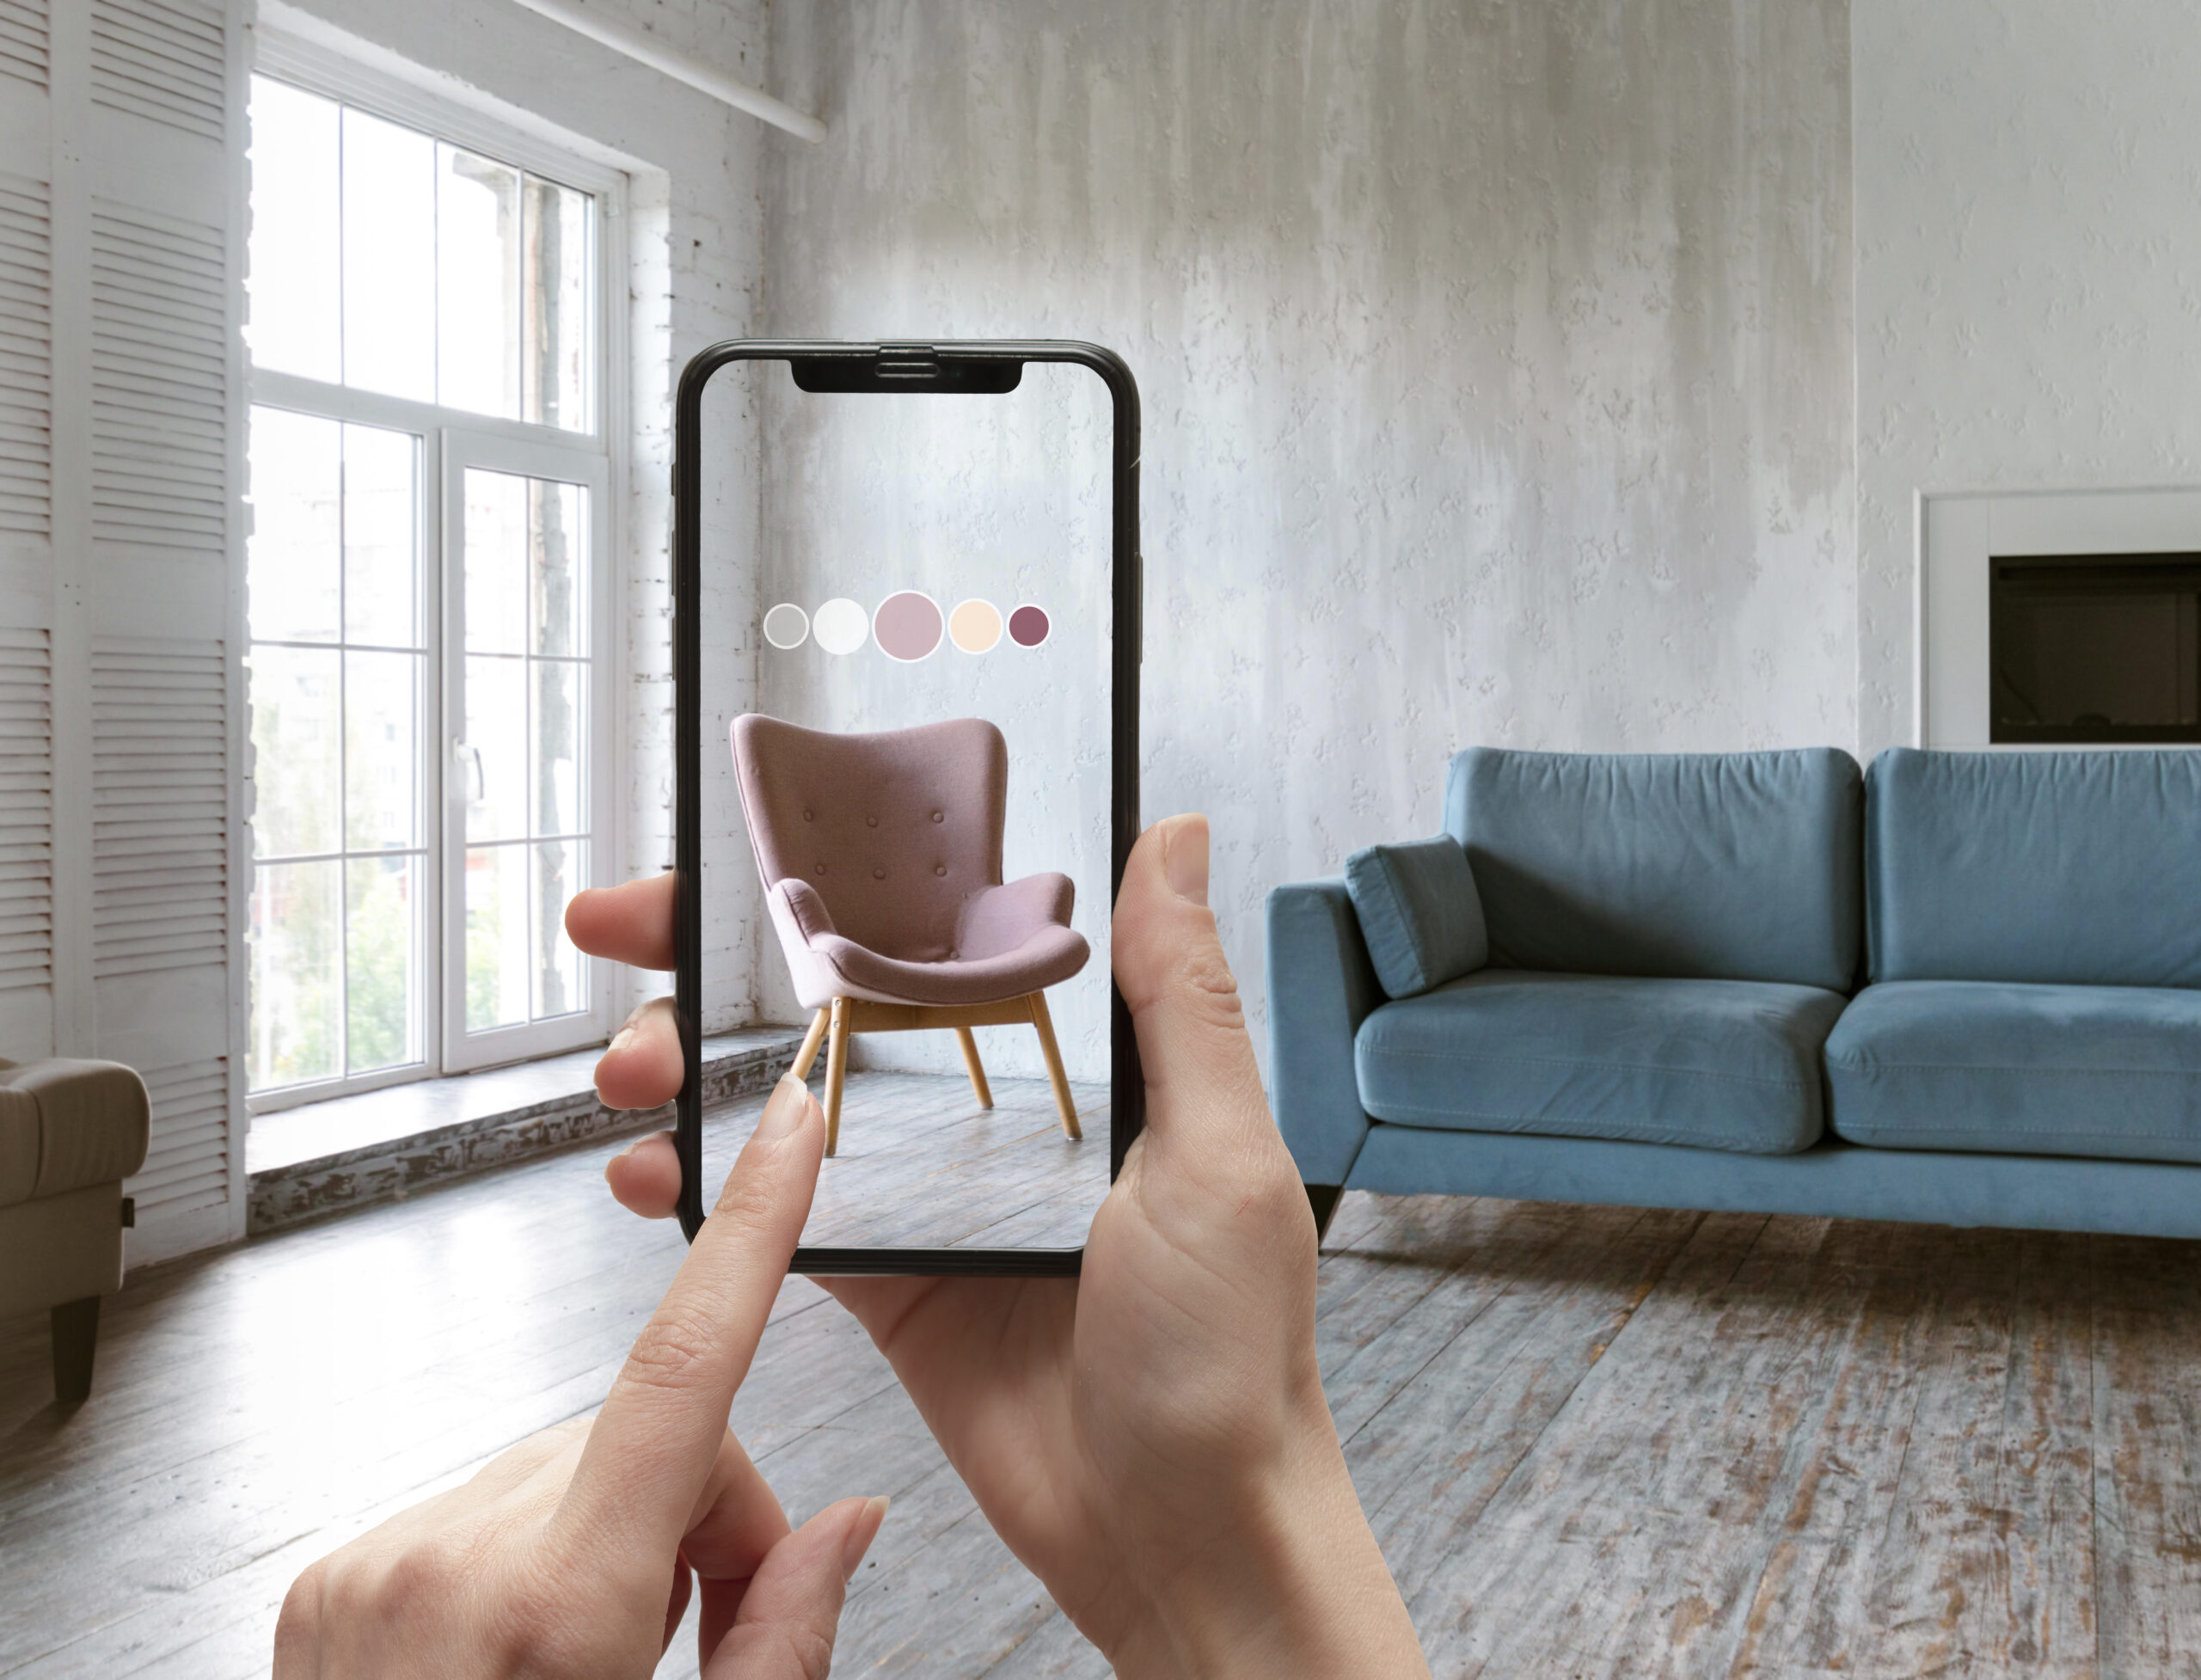 AR in mobile apps